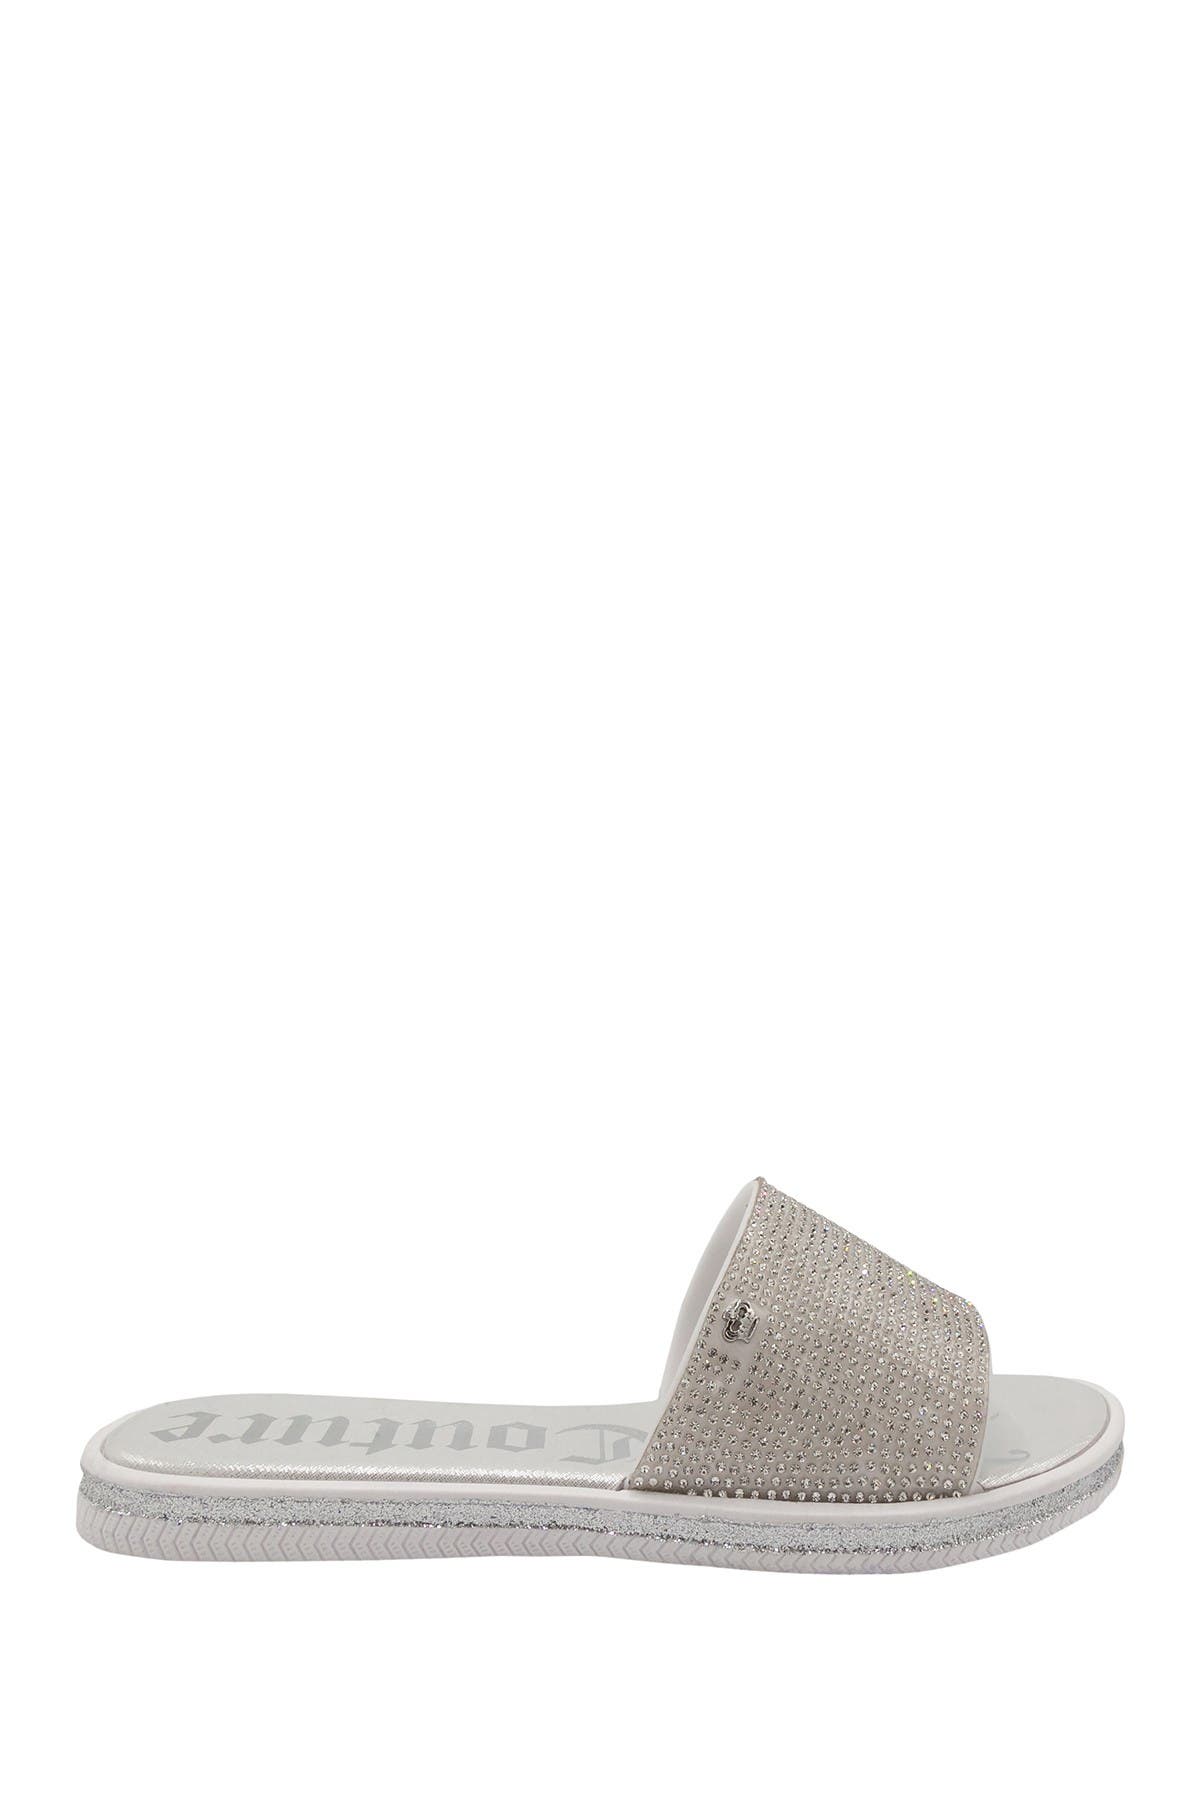 Juicy Couture Yippy Slide Sandal In Grey